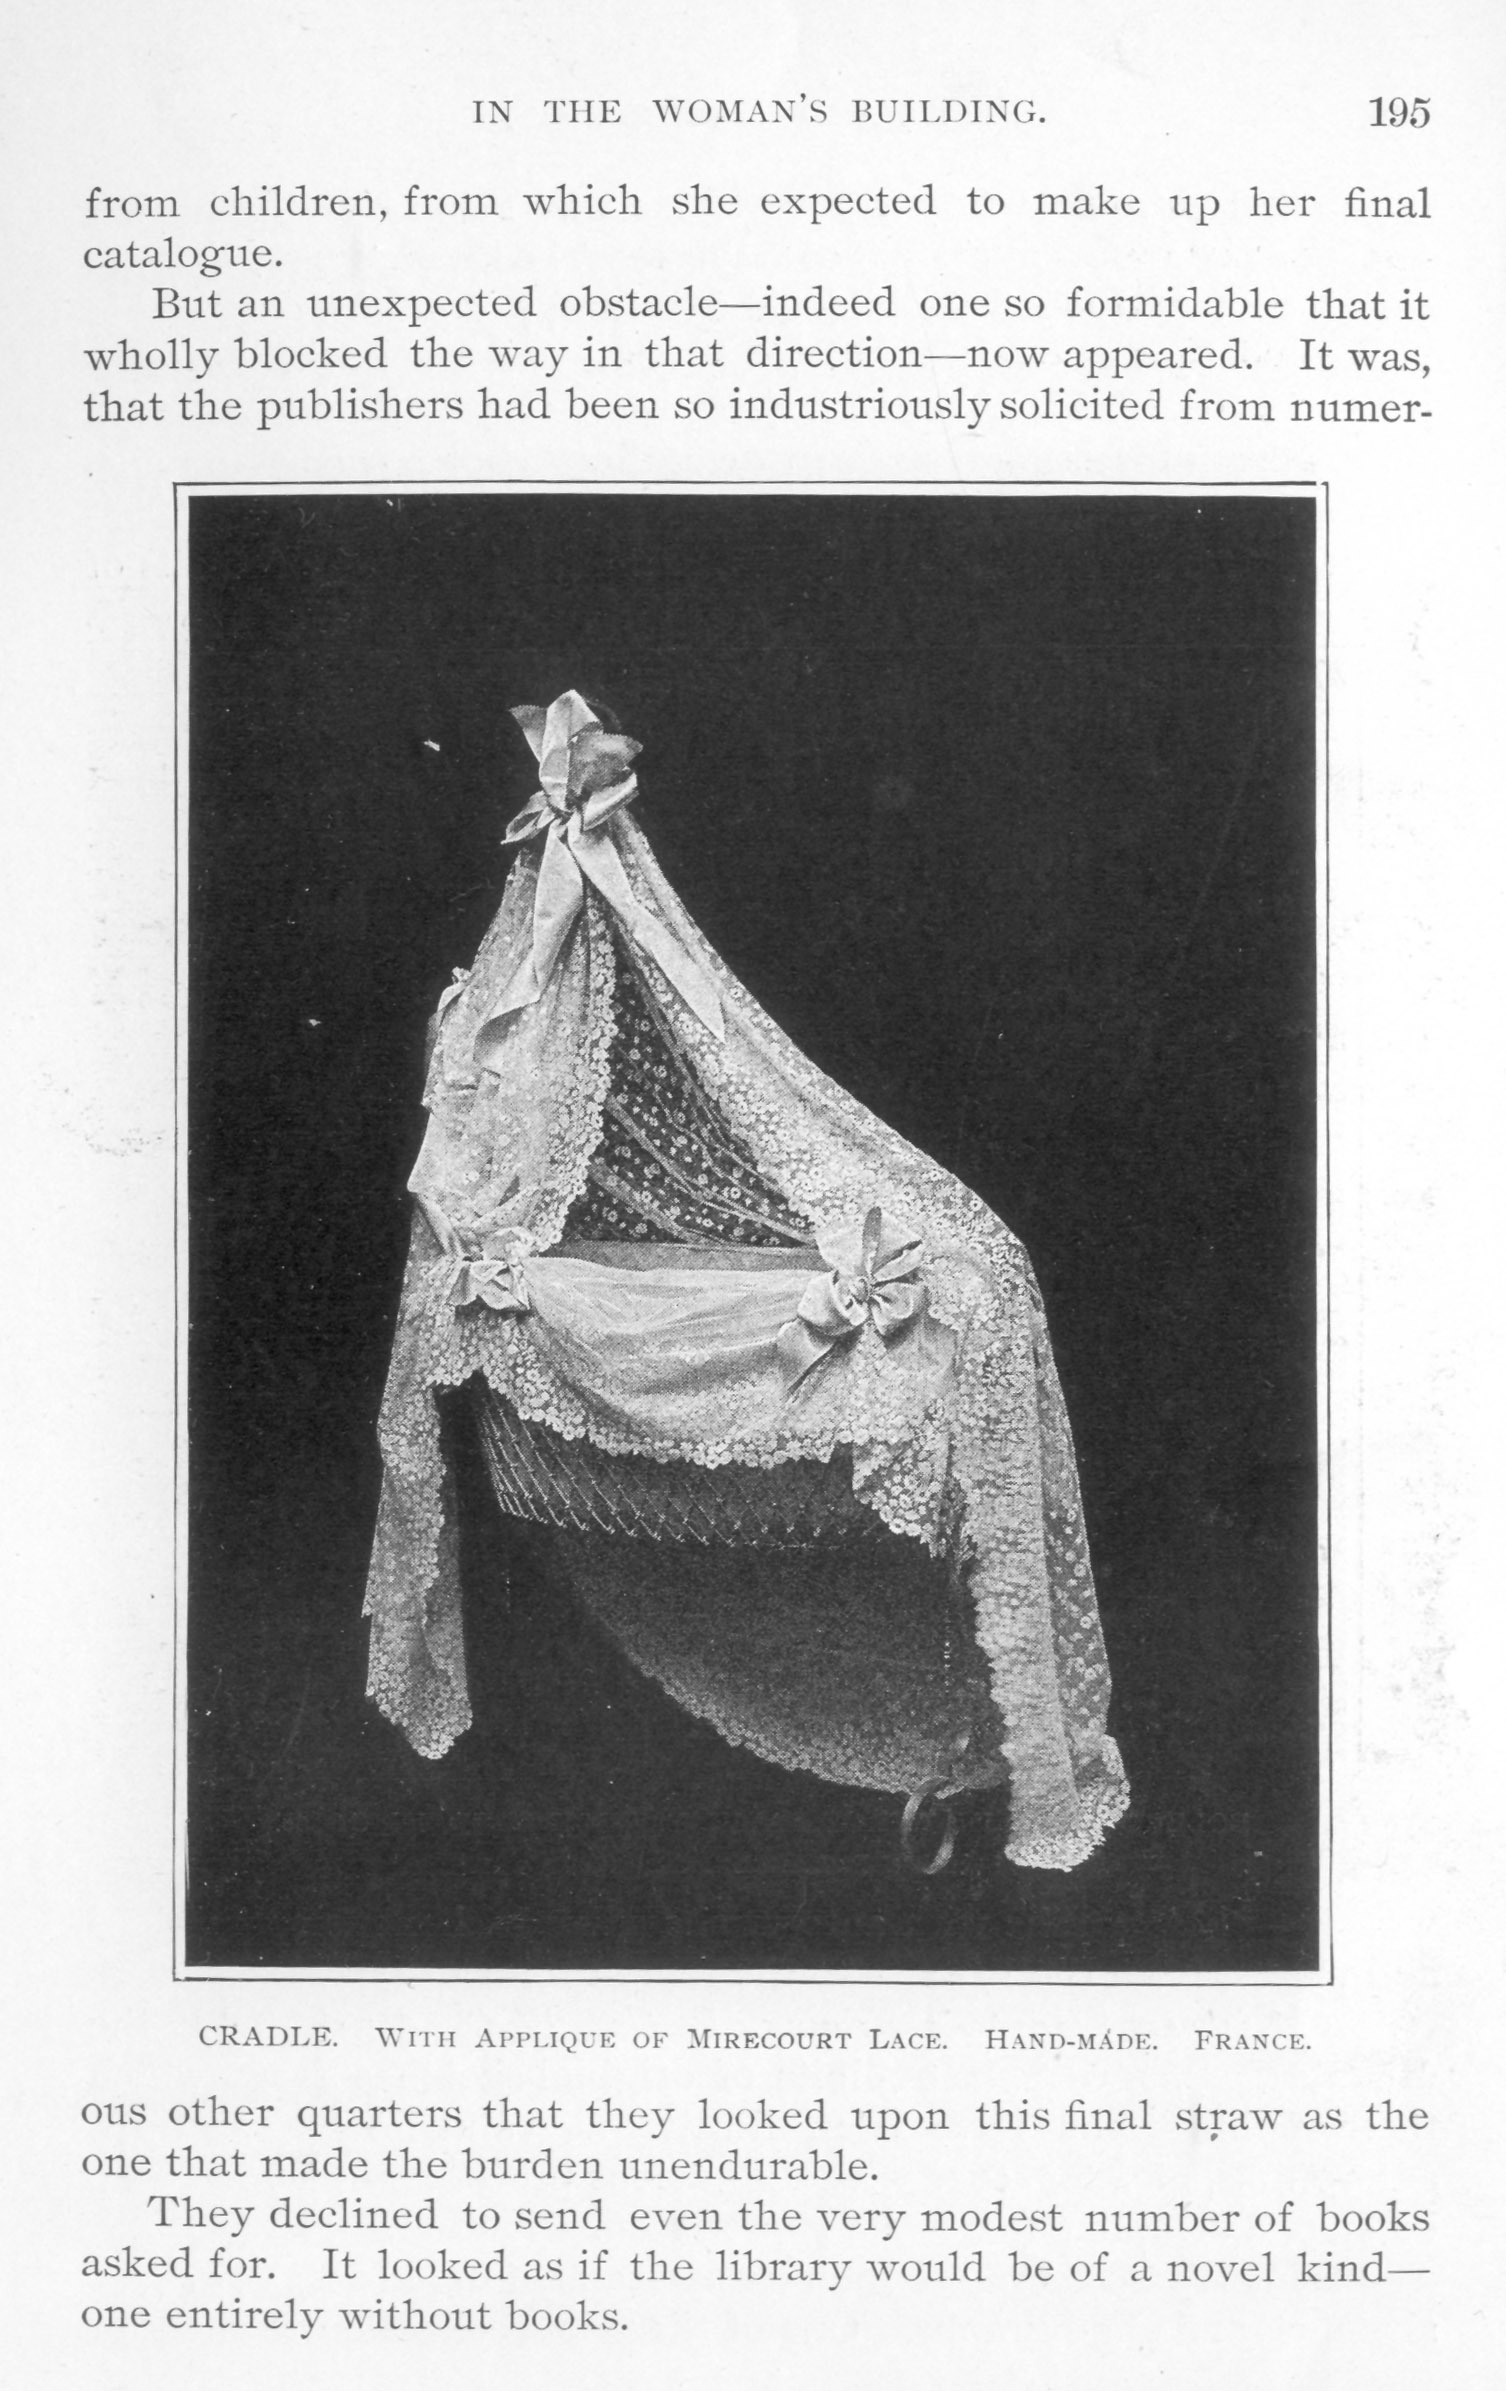 cradle with bonnet, all decorated with lace